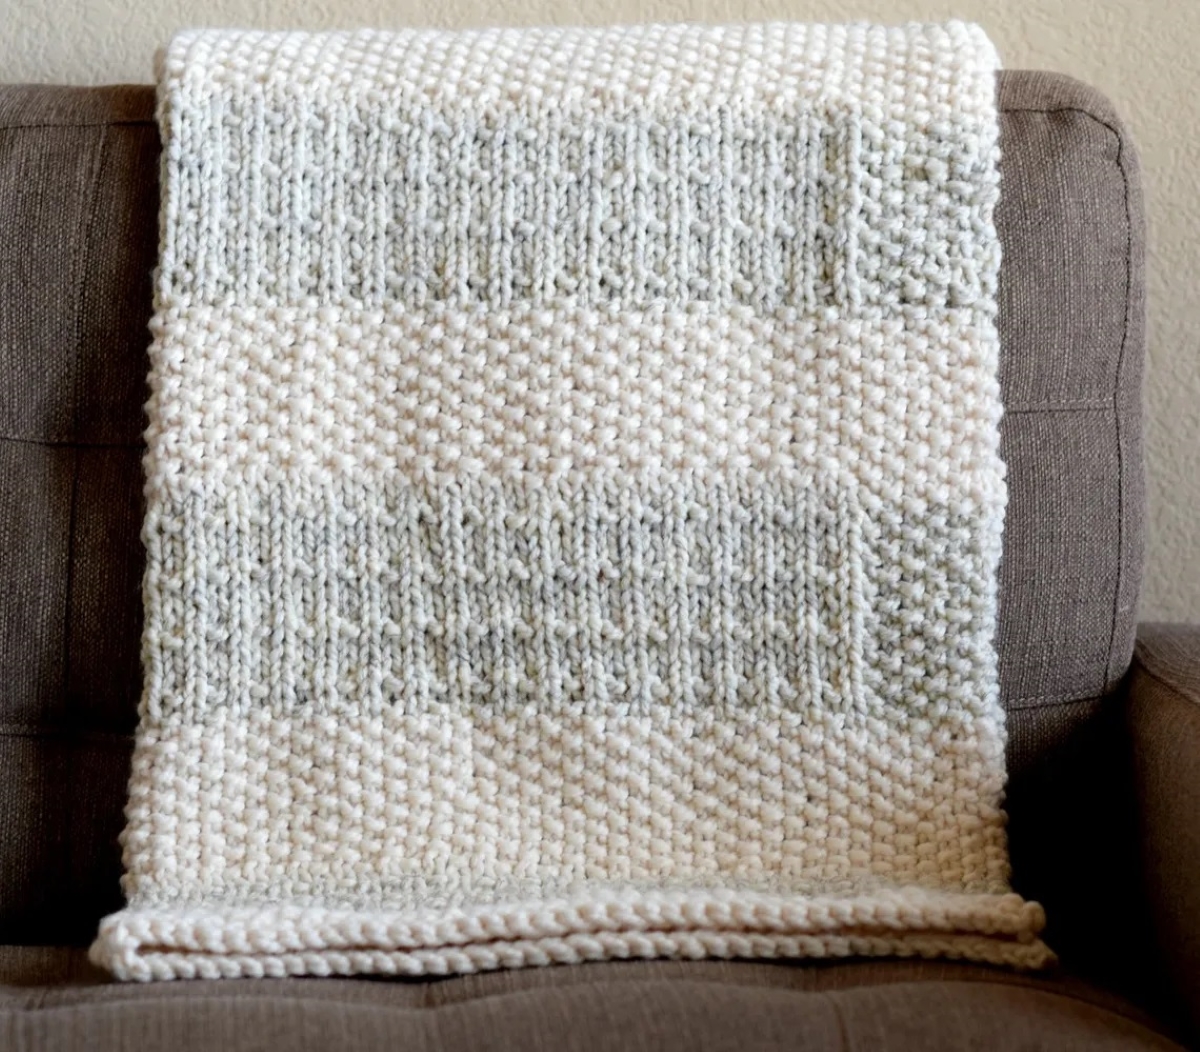 knitting patterns for beginners - light colored knitted blanket